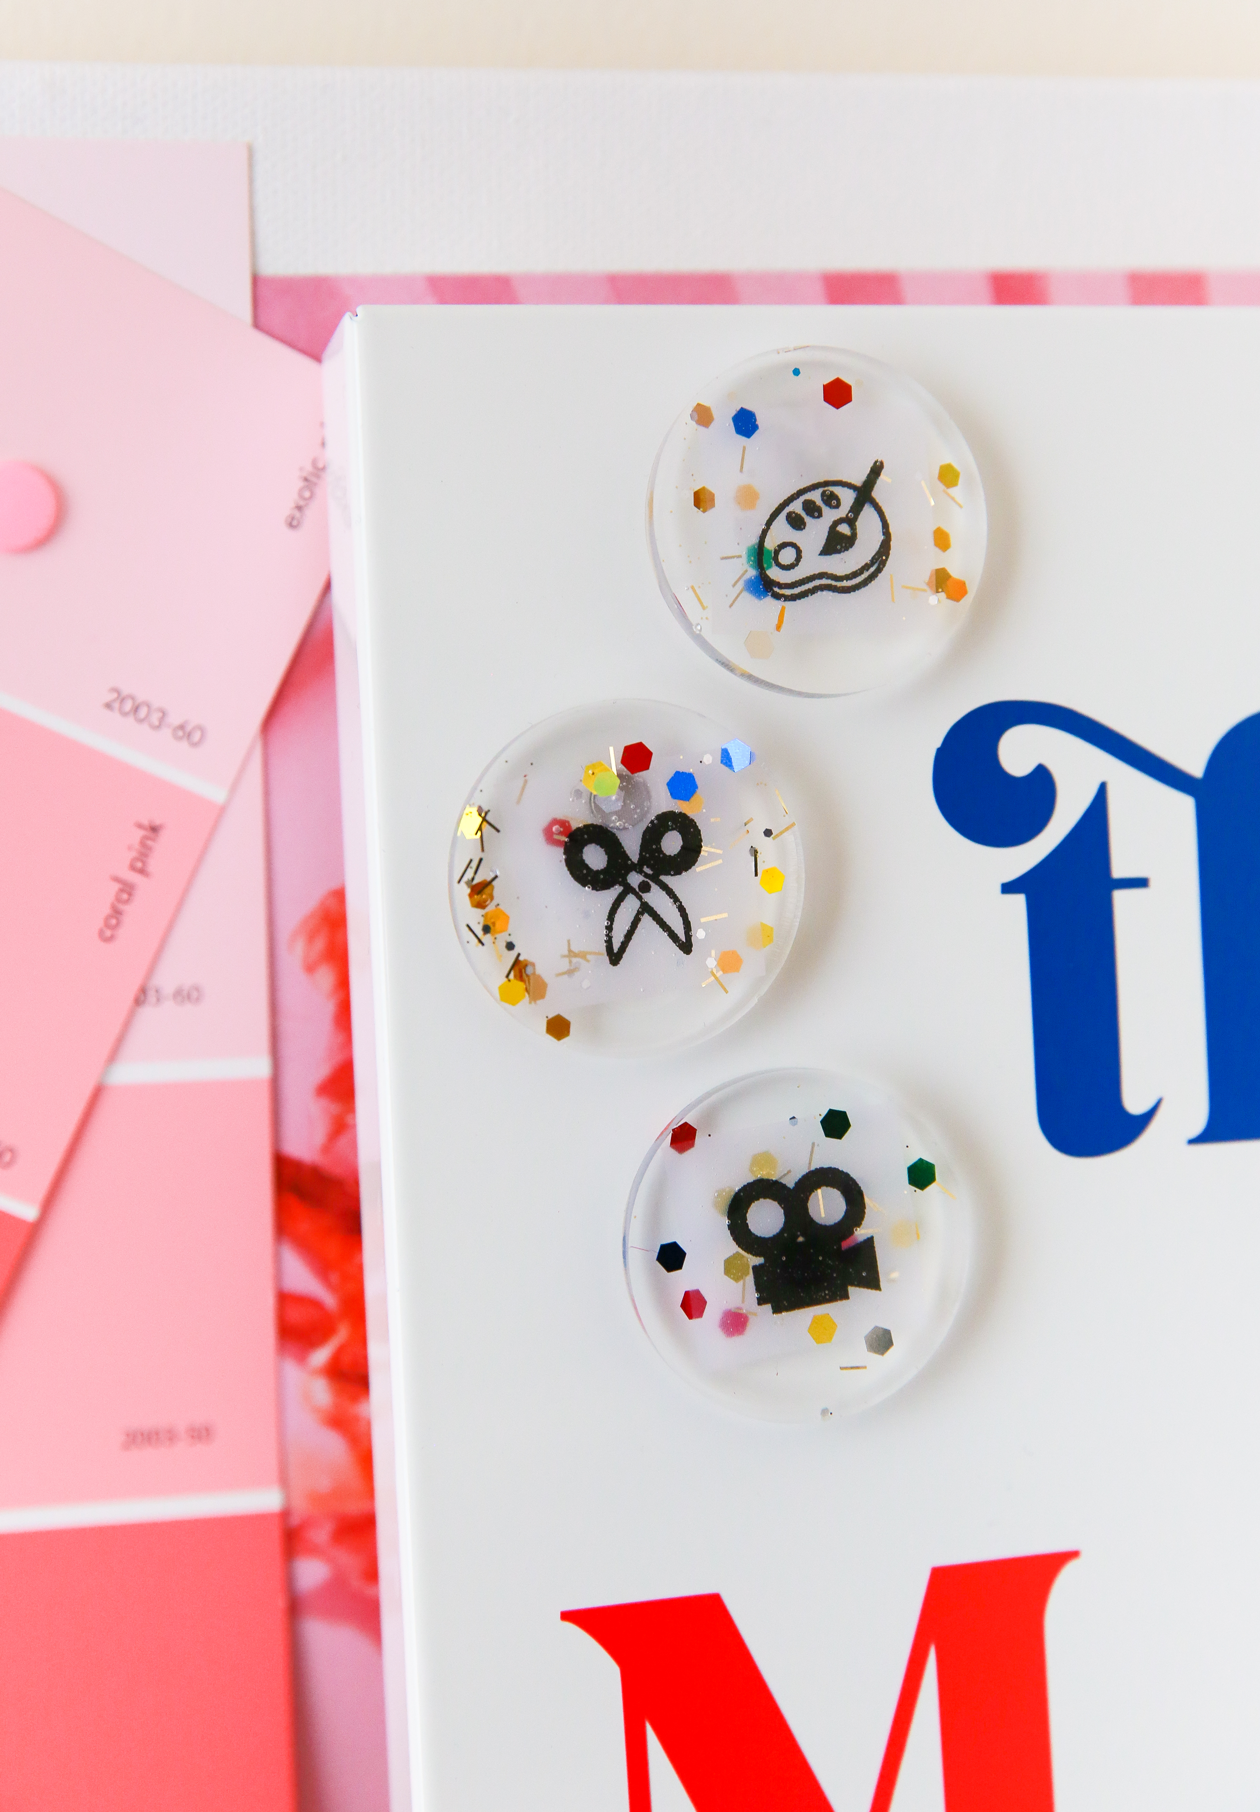 Make your own custom resin magnets with this easy DIY!